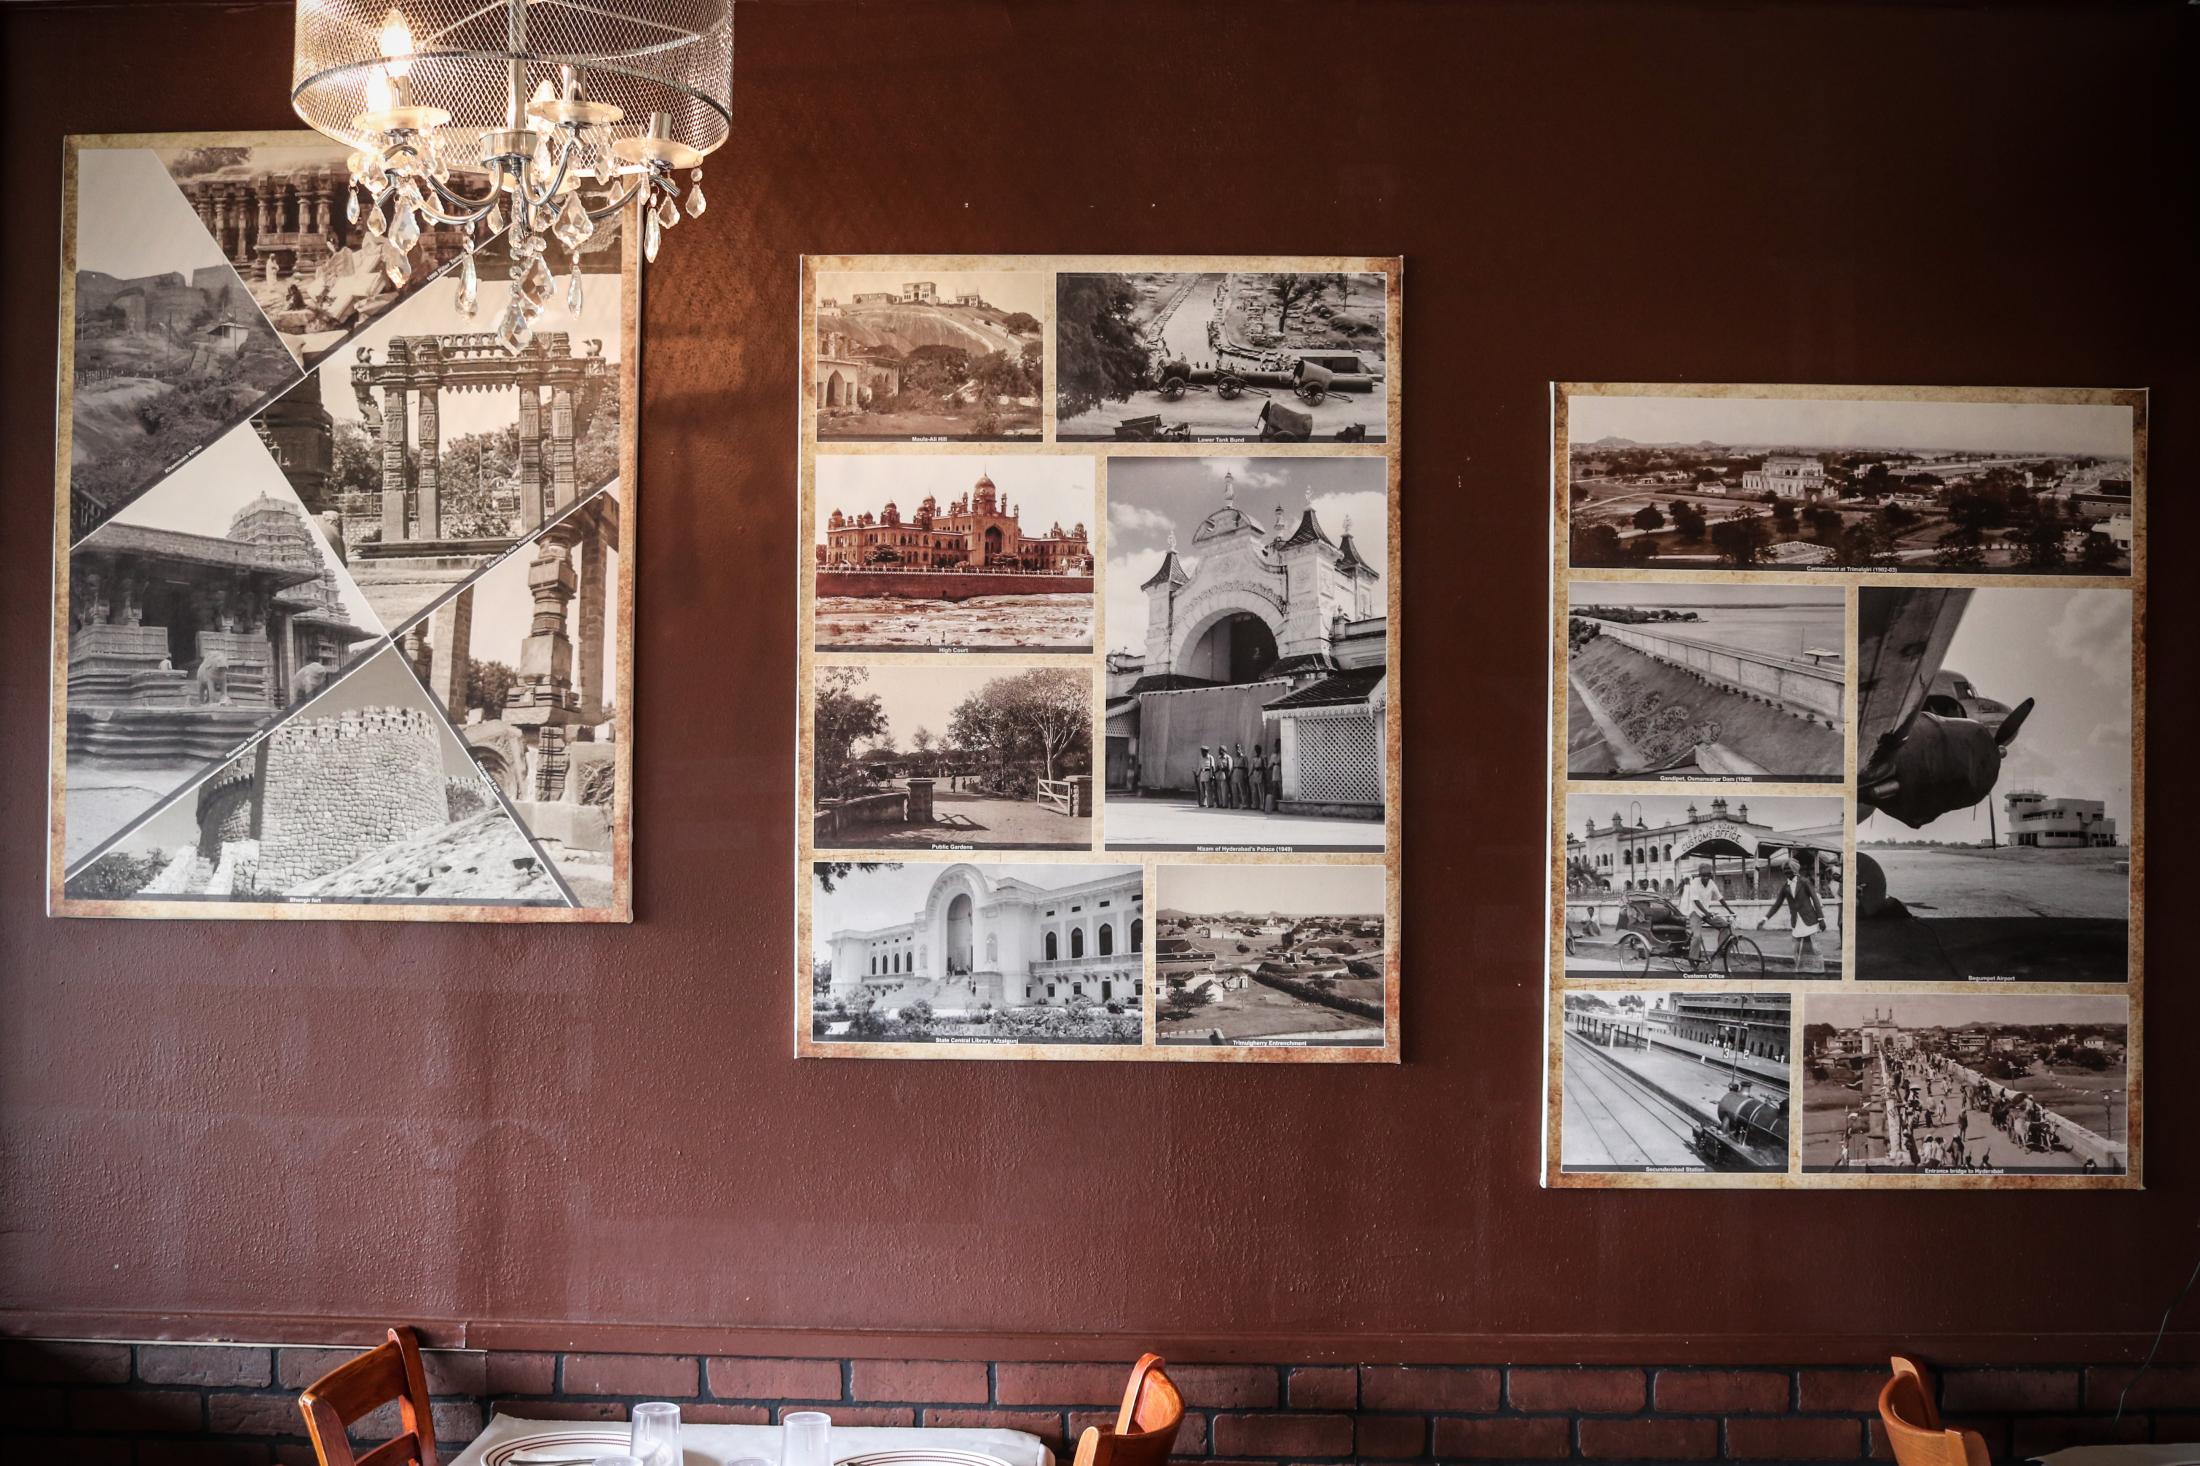 Indian Food - Photo collages showing old pictures of the Indian state...